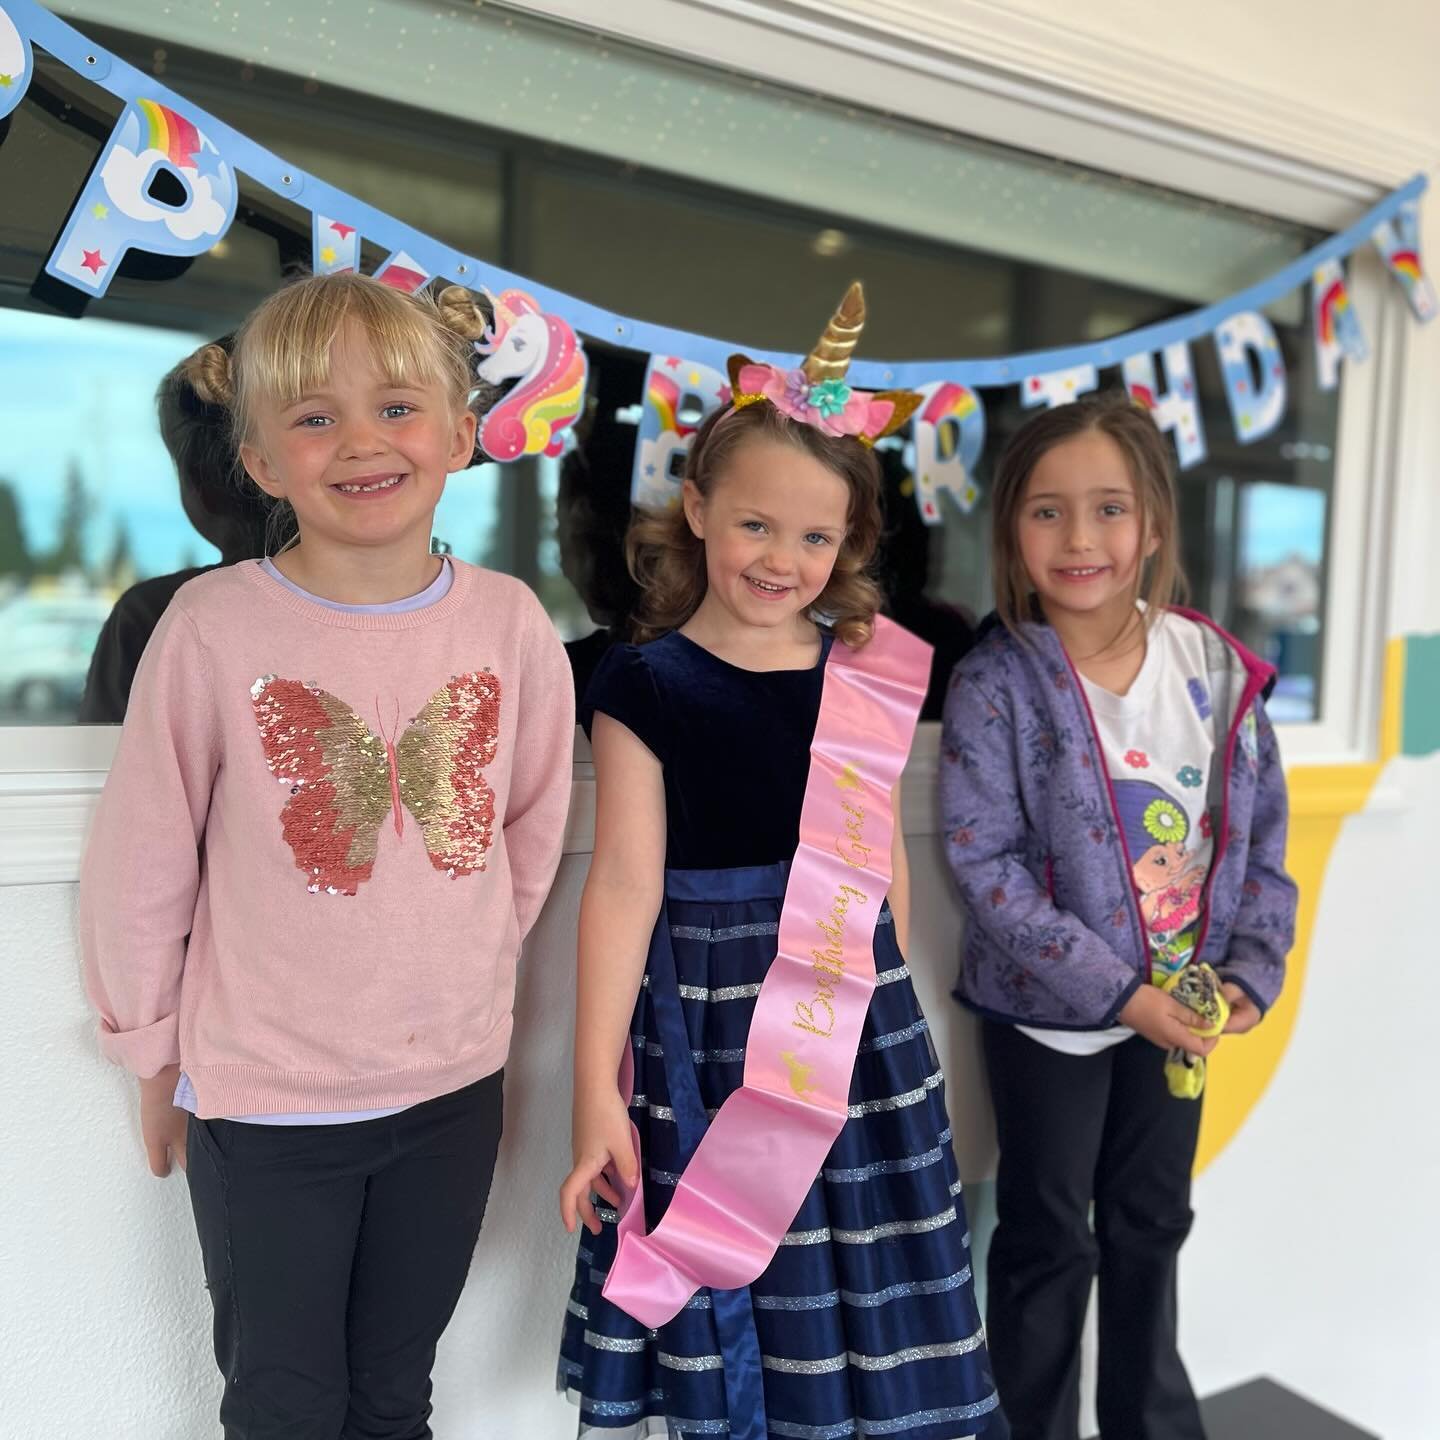 🎉 What a blast we had celebrating Sadie&rsquo;s birthday at High Impact Dance! 🎂 Sadie and her friends zoomed through obstacle courses, boogied down at a disco dance party 🕺, raced in relays, listened to a special birthday storytime 📖, soared wit